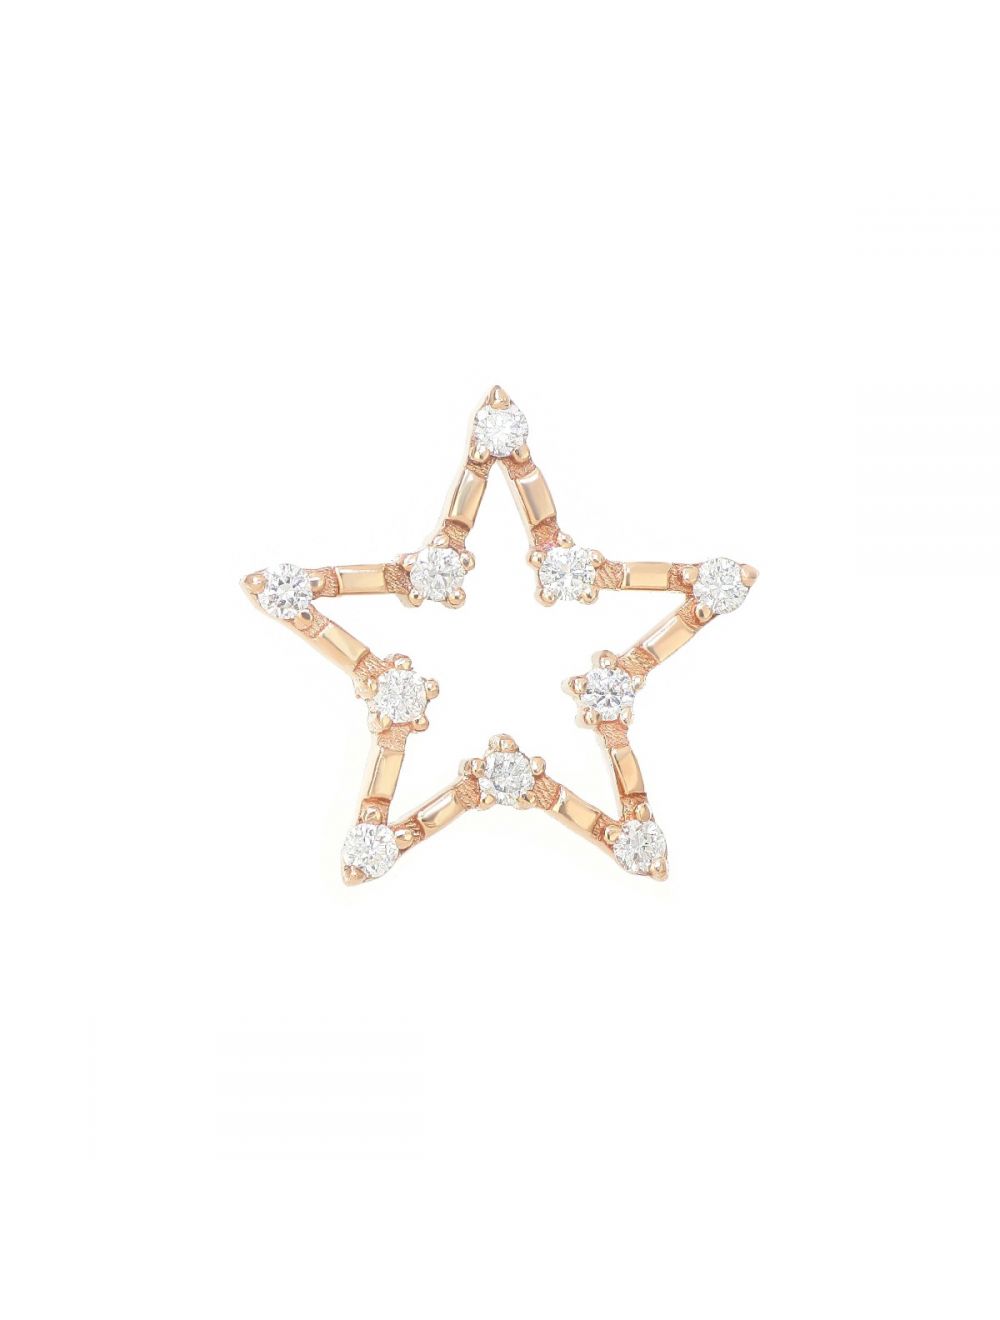 Maman et Sophie Single Star Earring 18Kt Rose Gold and Diamonds